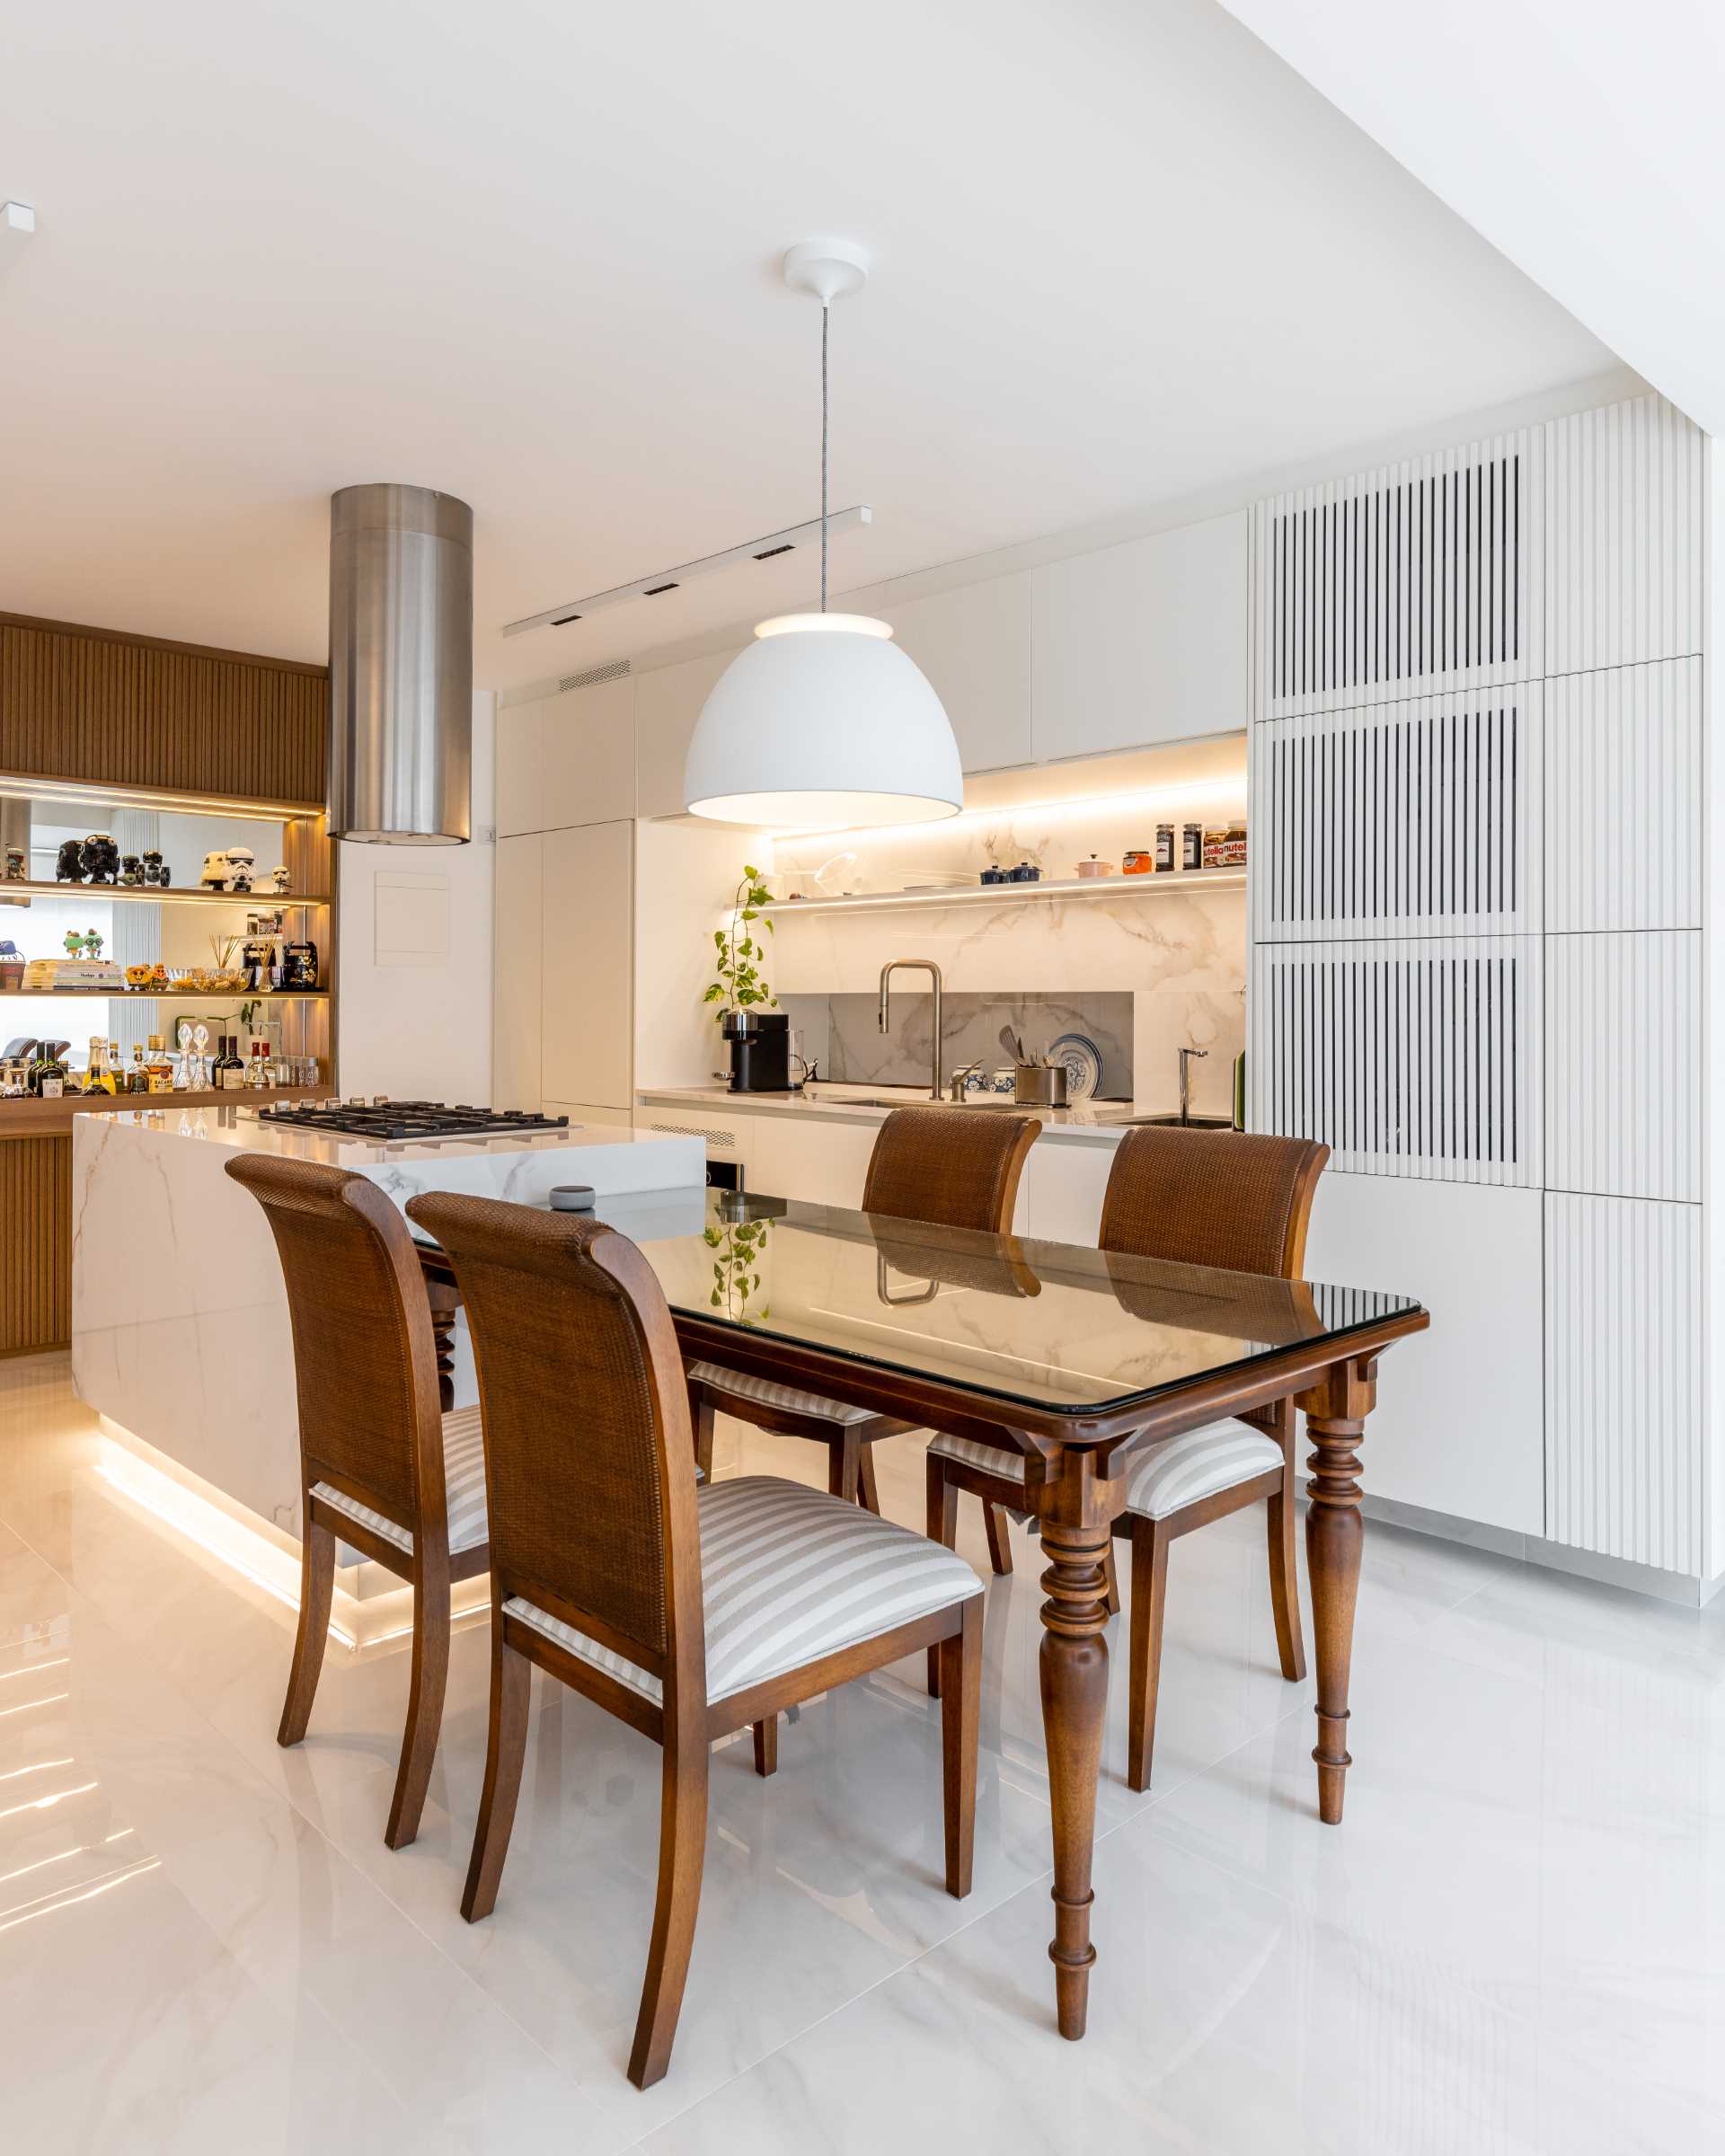 A modern kitchen includes wood details, a large island with an adjacent dining table, and hidden lighting.